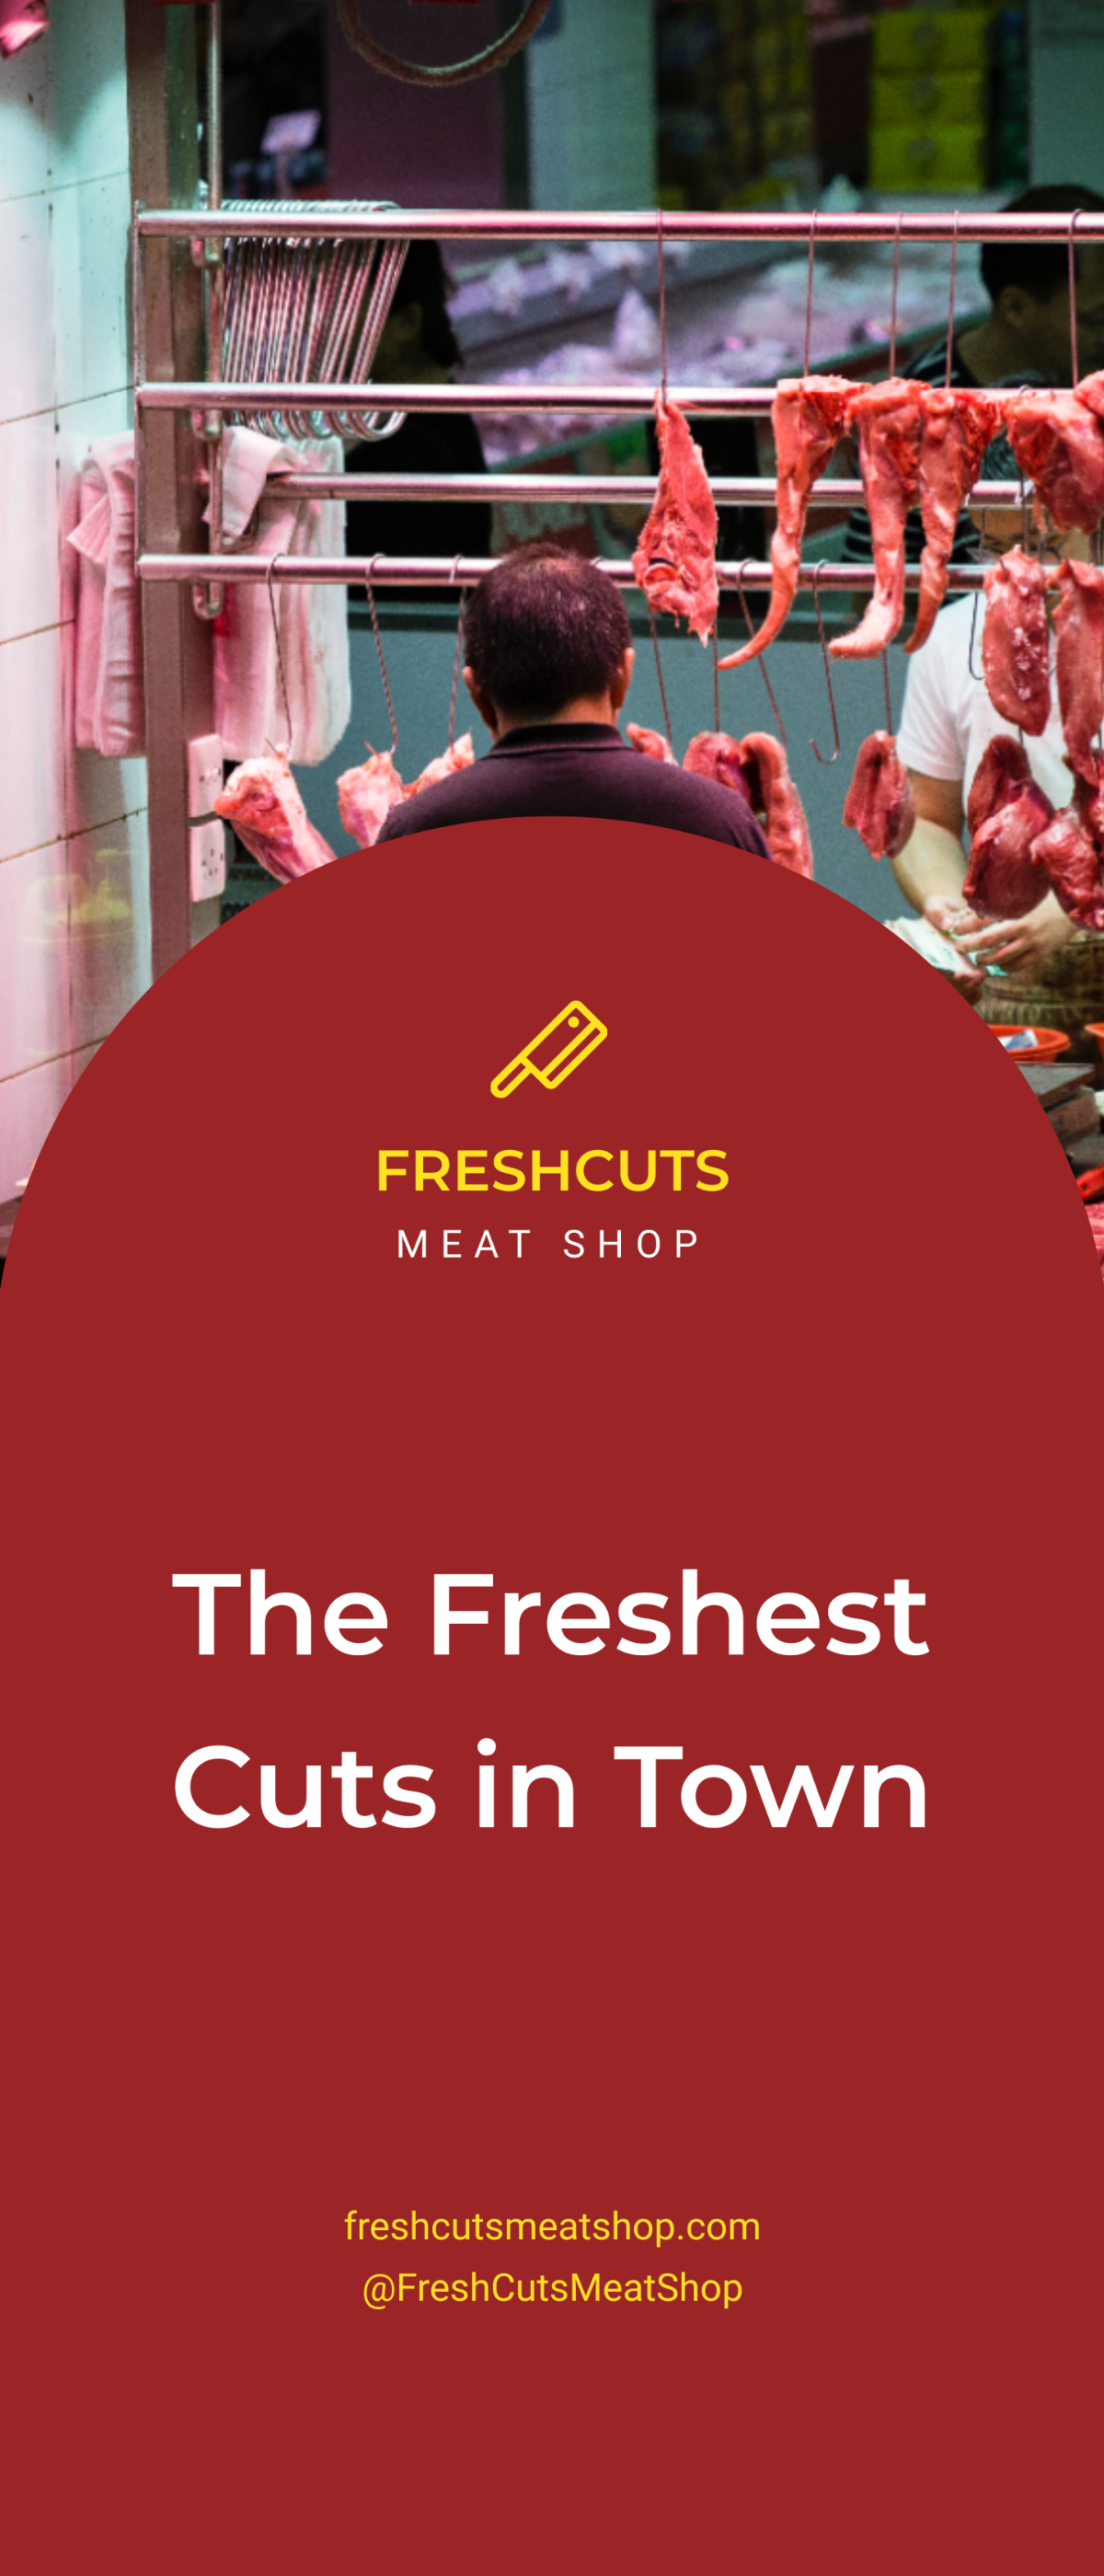 Free Meat Shop Roll Up Banner Template